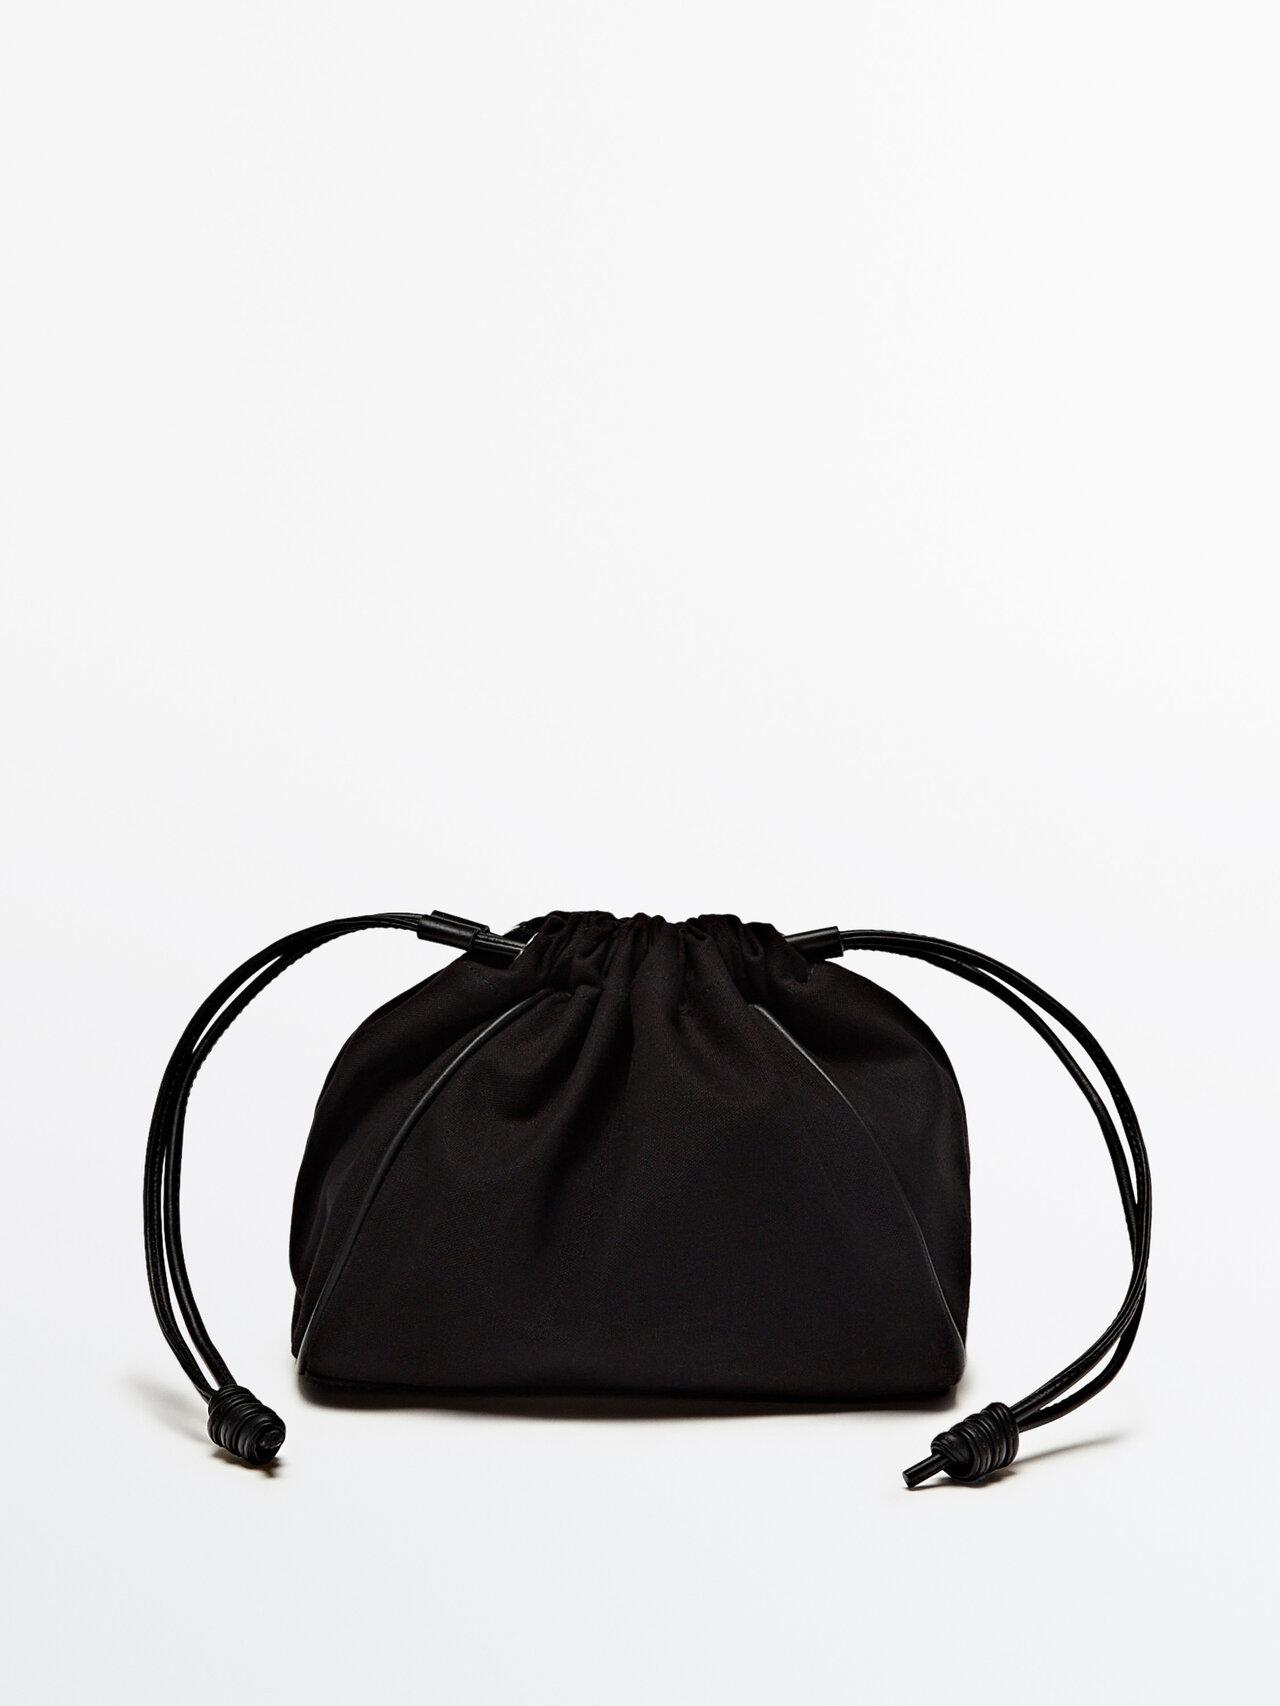 MASSIMO DUTTI Pouch Bag With Leather Details in Black | Lyst